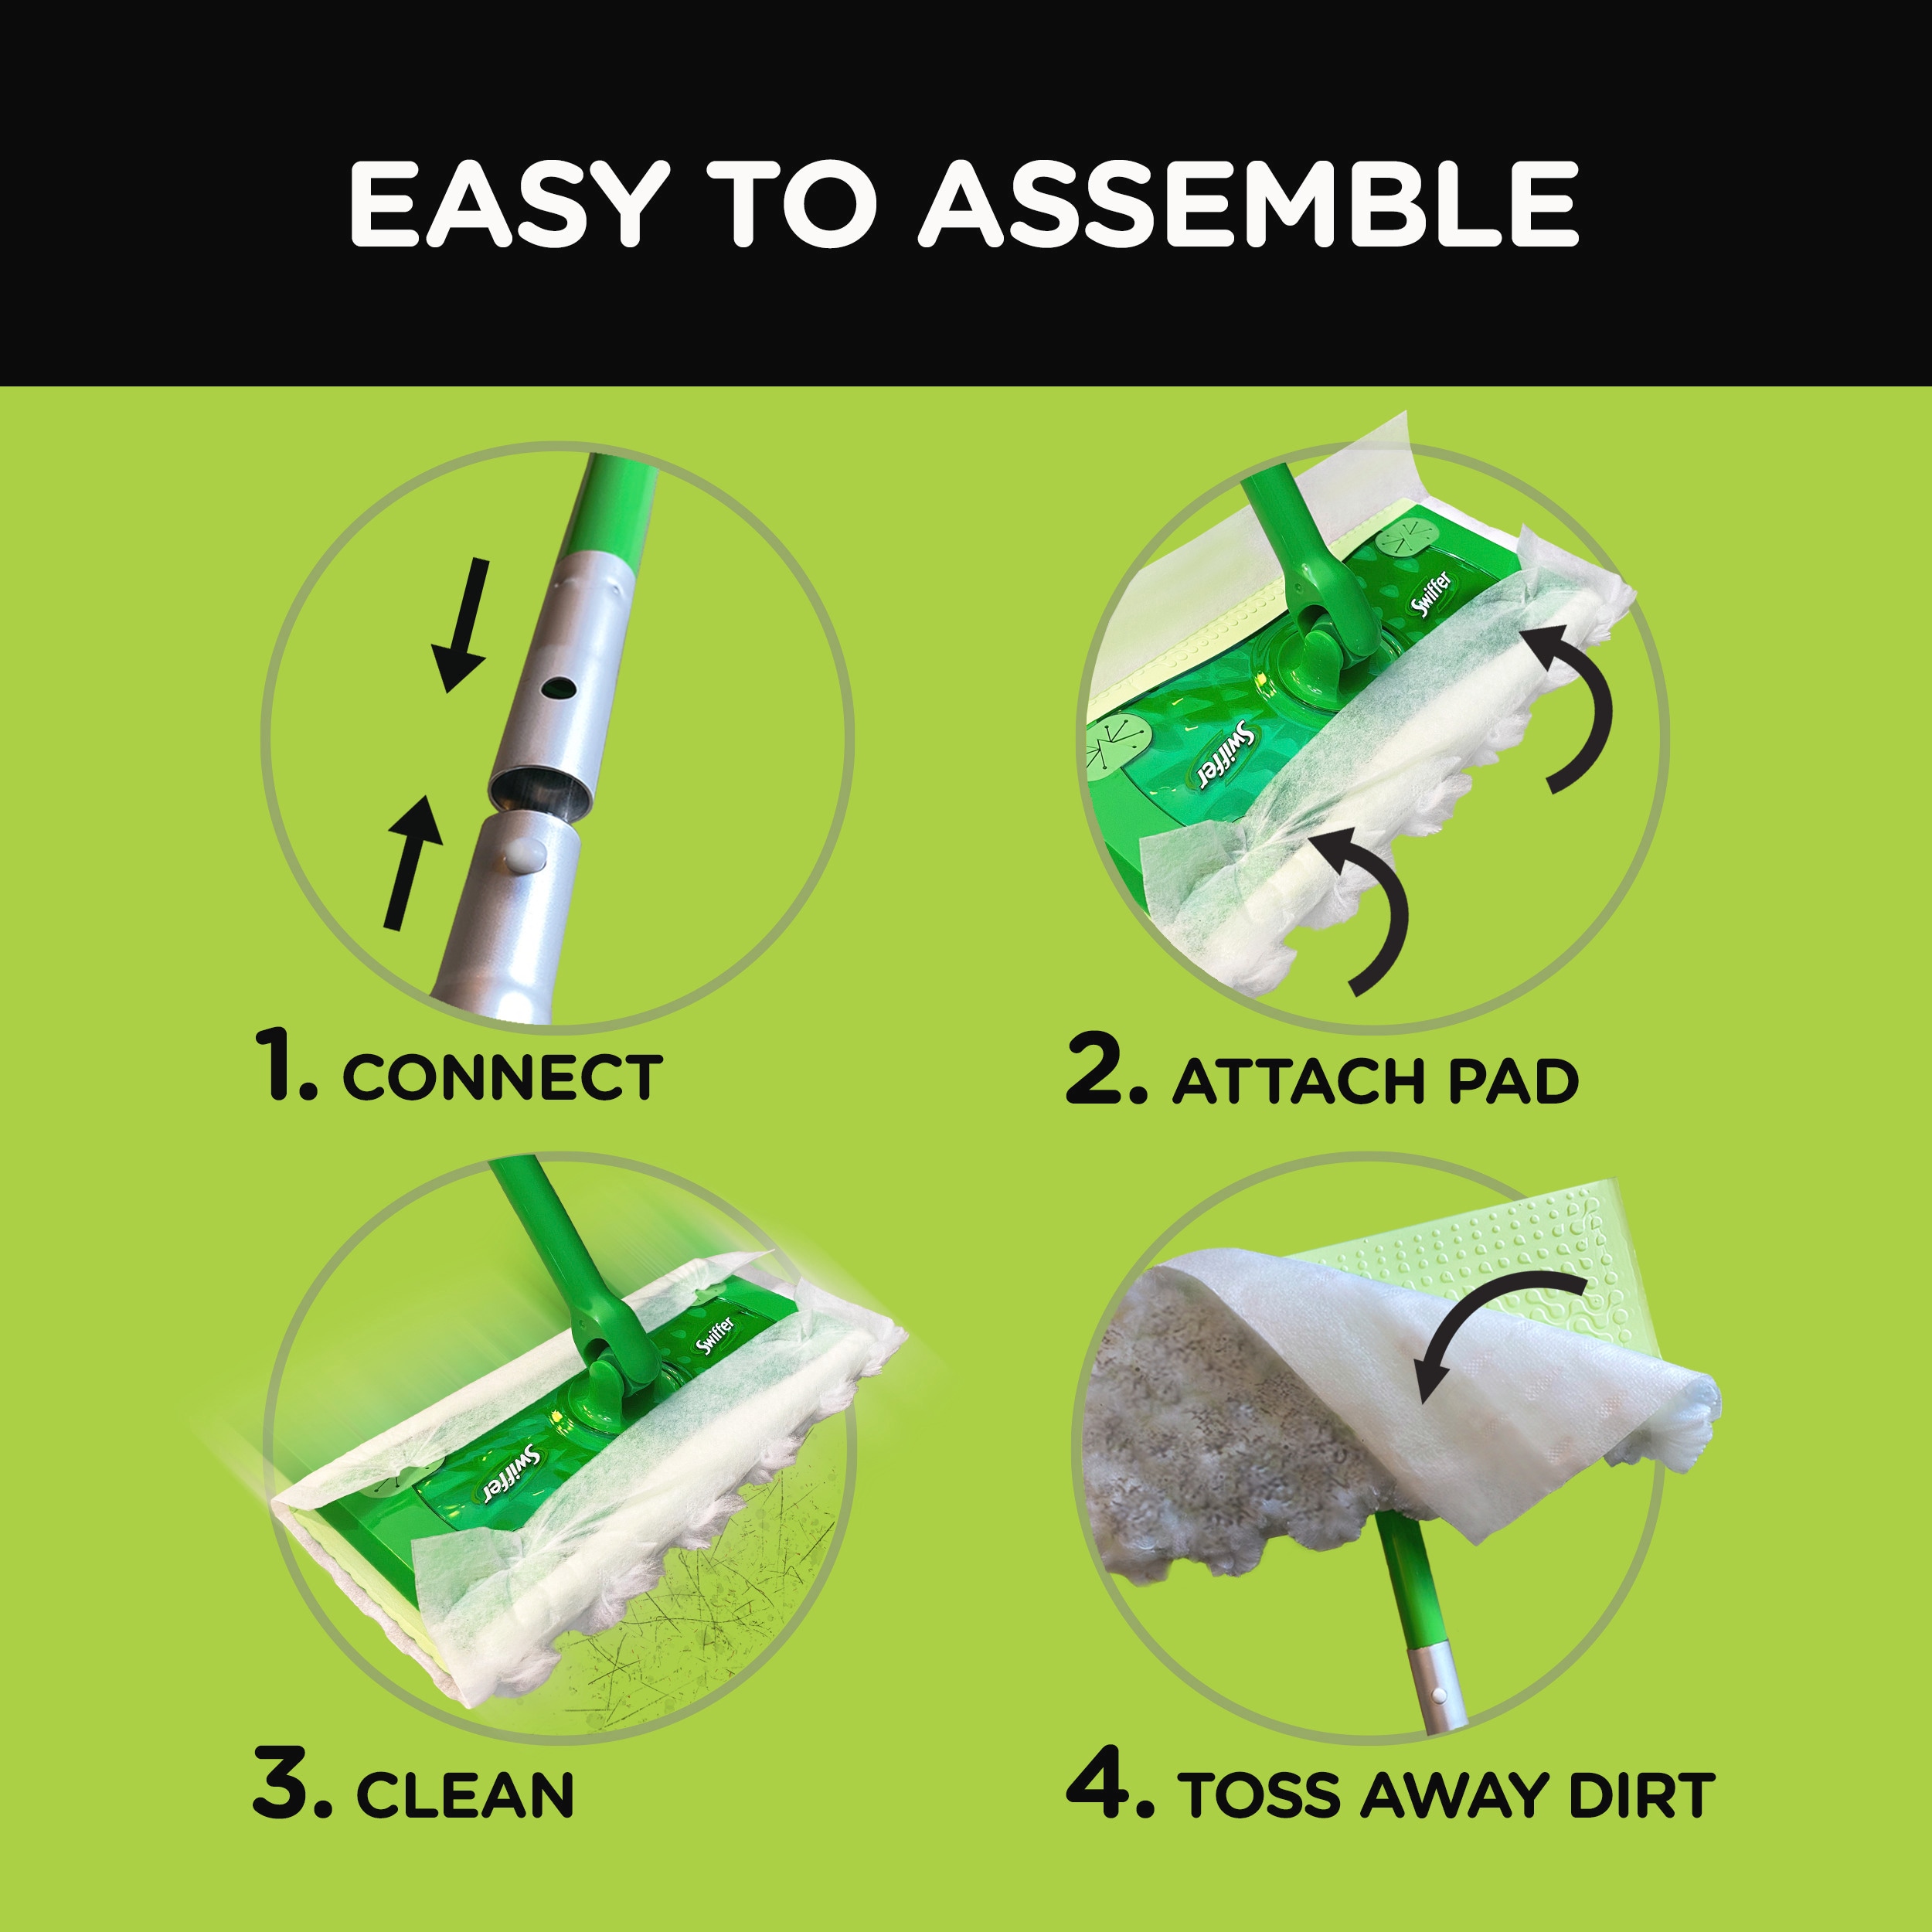 Swiffer Sweeper Cleaner Dry and Wet Mop Starter Kit for Cleaning Hardwood  and Floors, Includes: 1 Mop, 7 Dry Cloths, 3 Wet Cloths